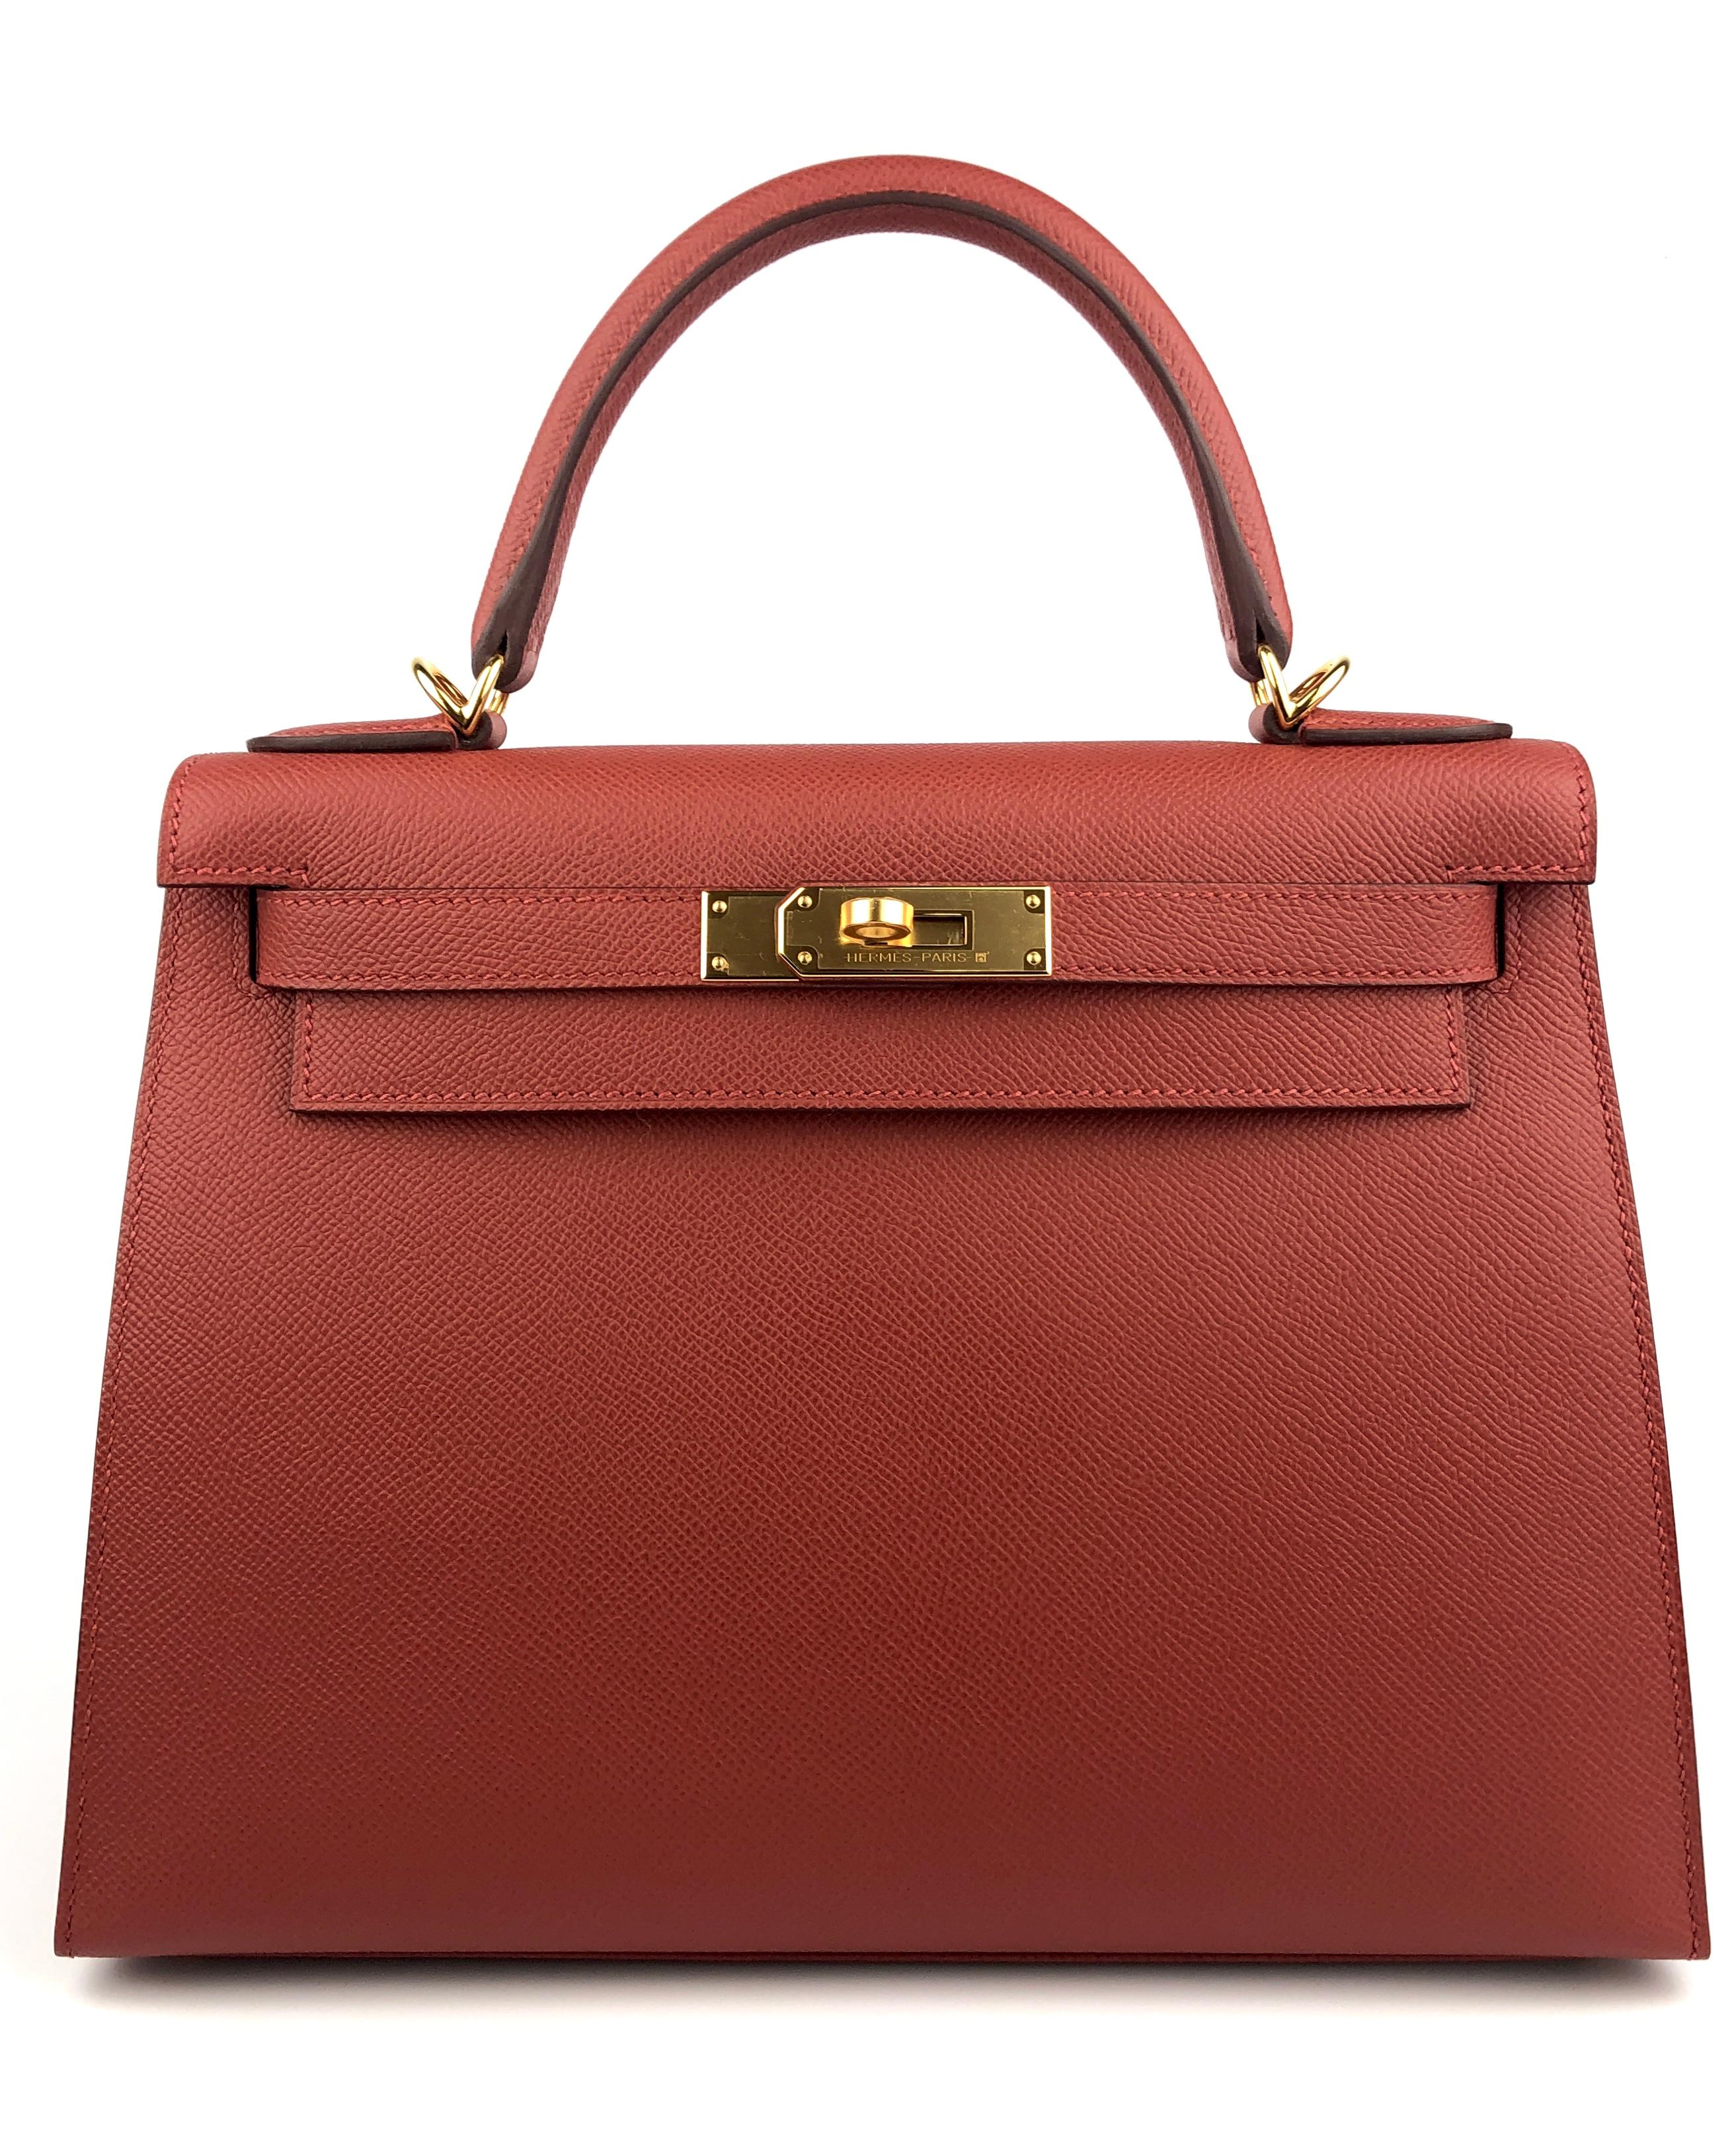 Absolutely Stunning Rare New 2023 Hermes Kelly 28 Sellier Rouge Venetien Epsom Leather complimented by Gold Hardware. New  2023 B Stamp. 

Shop with Confidence from Lux Addicts. Authenticity Guaranteed! 




